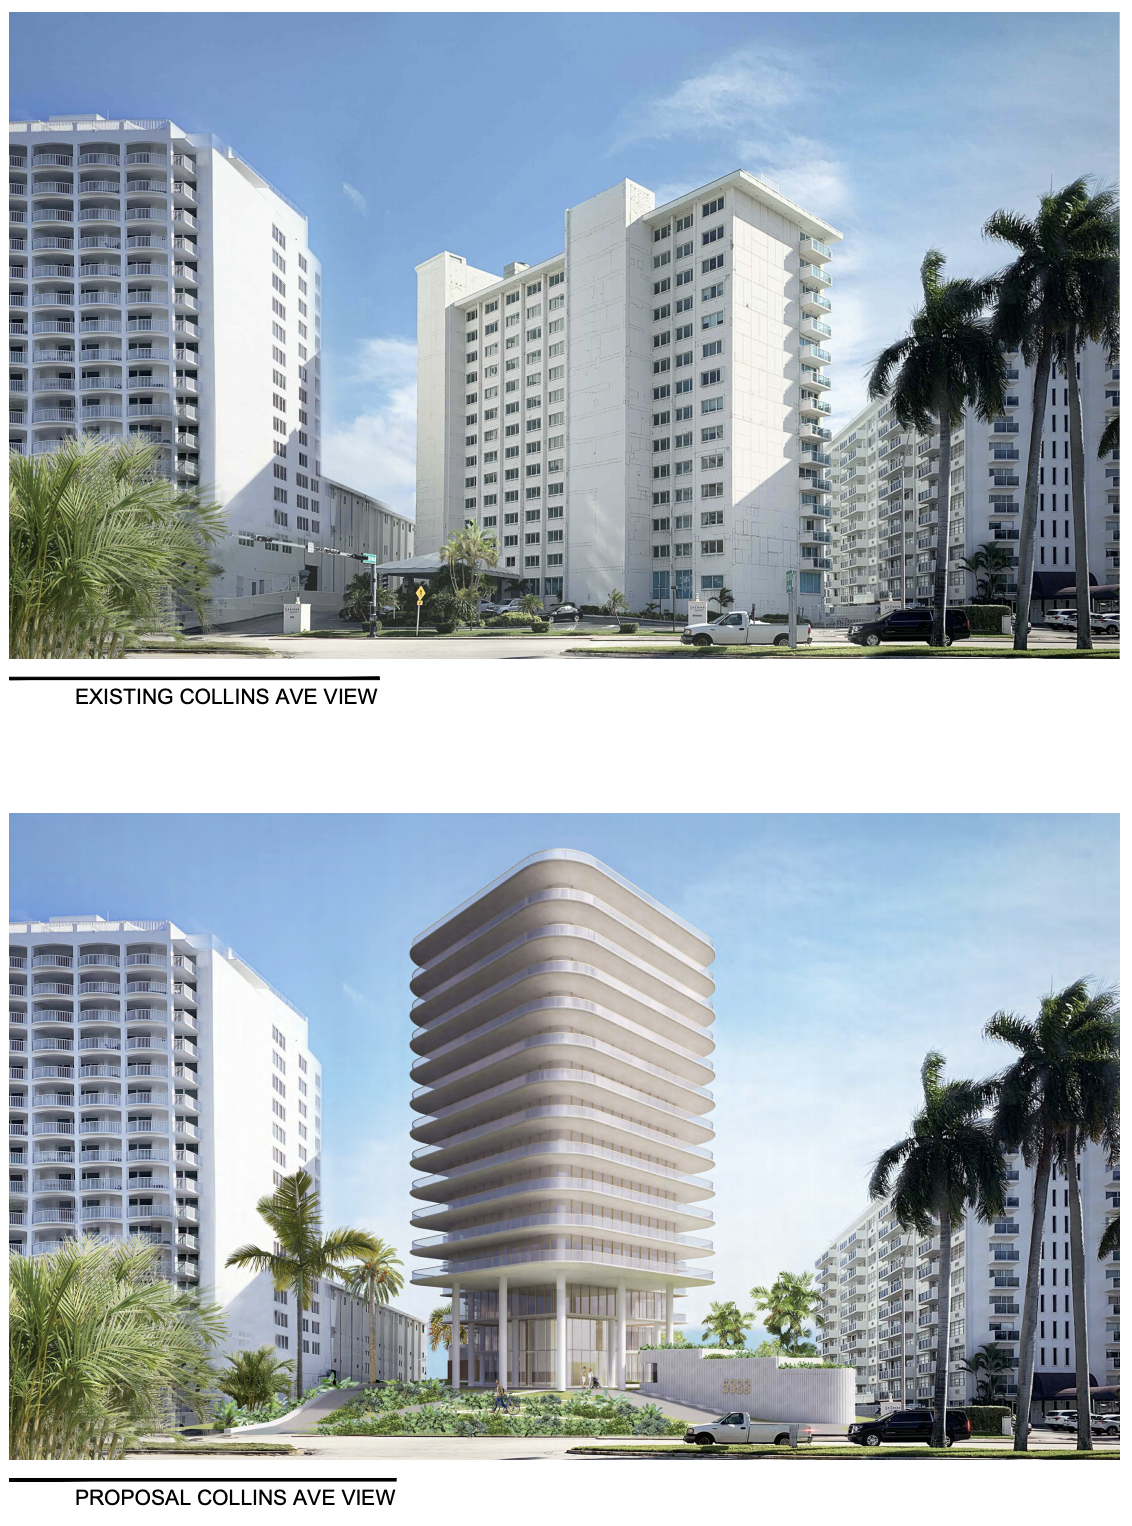 Existing Tower Vs. Proposed Tower. Courtesy of ODP Architects.